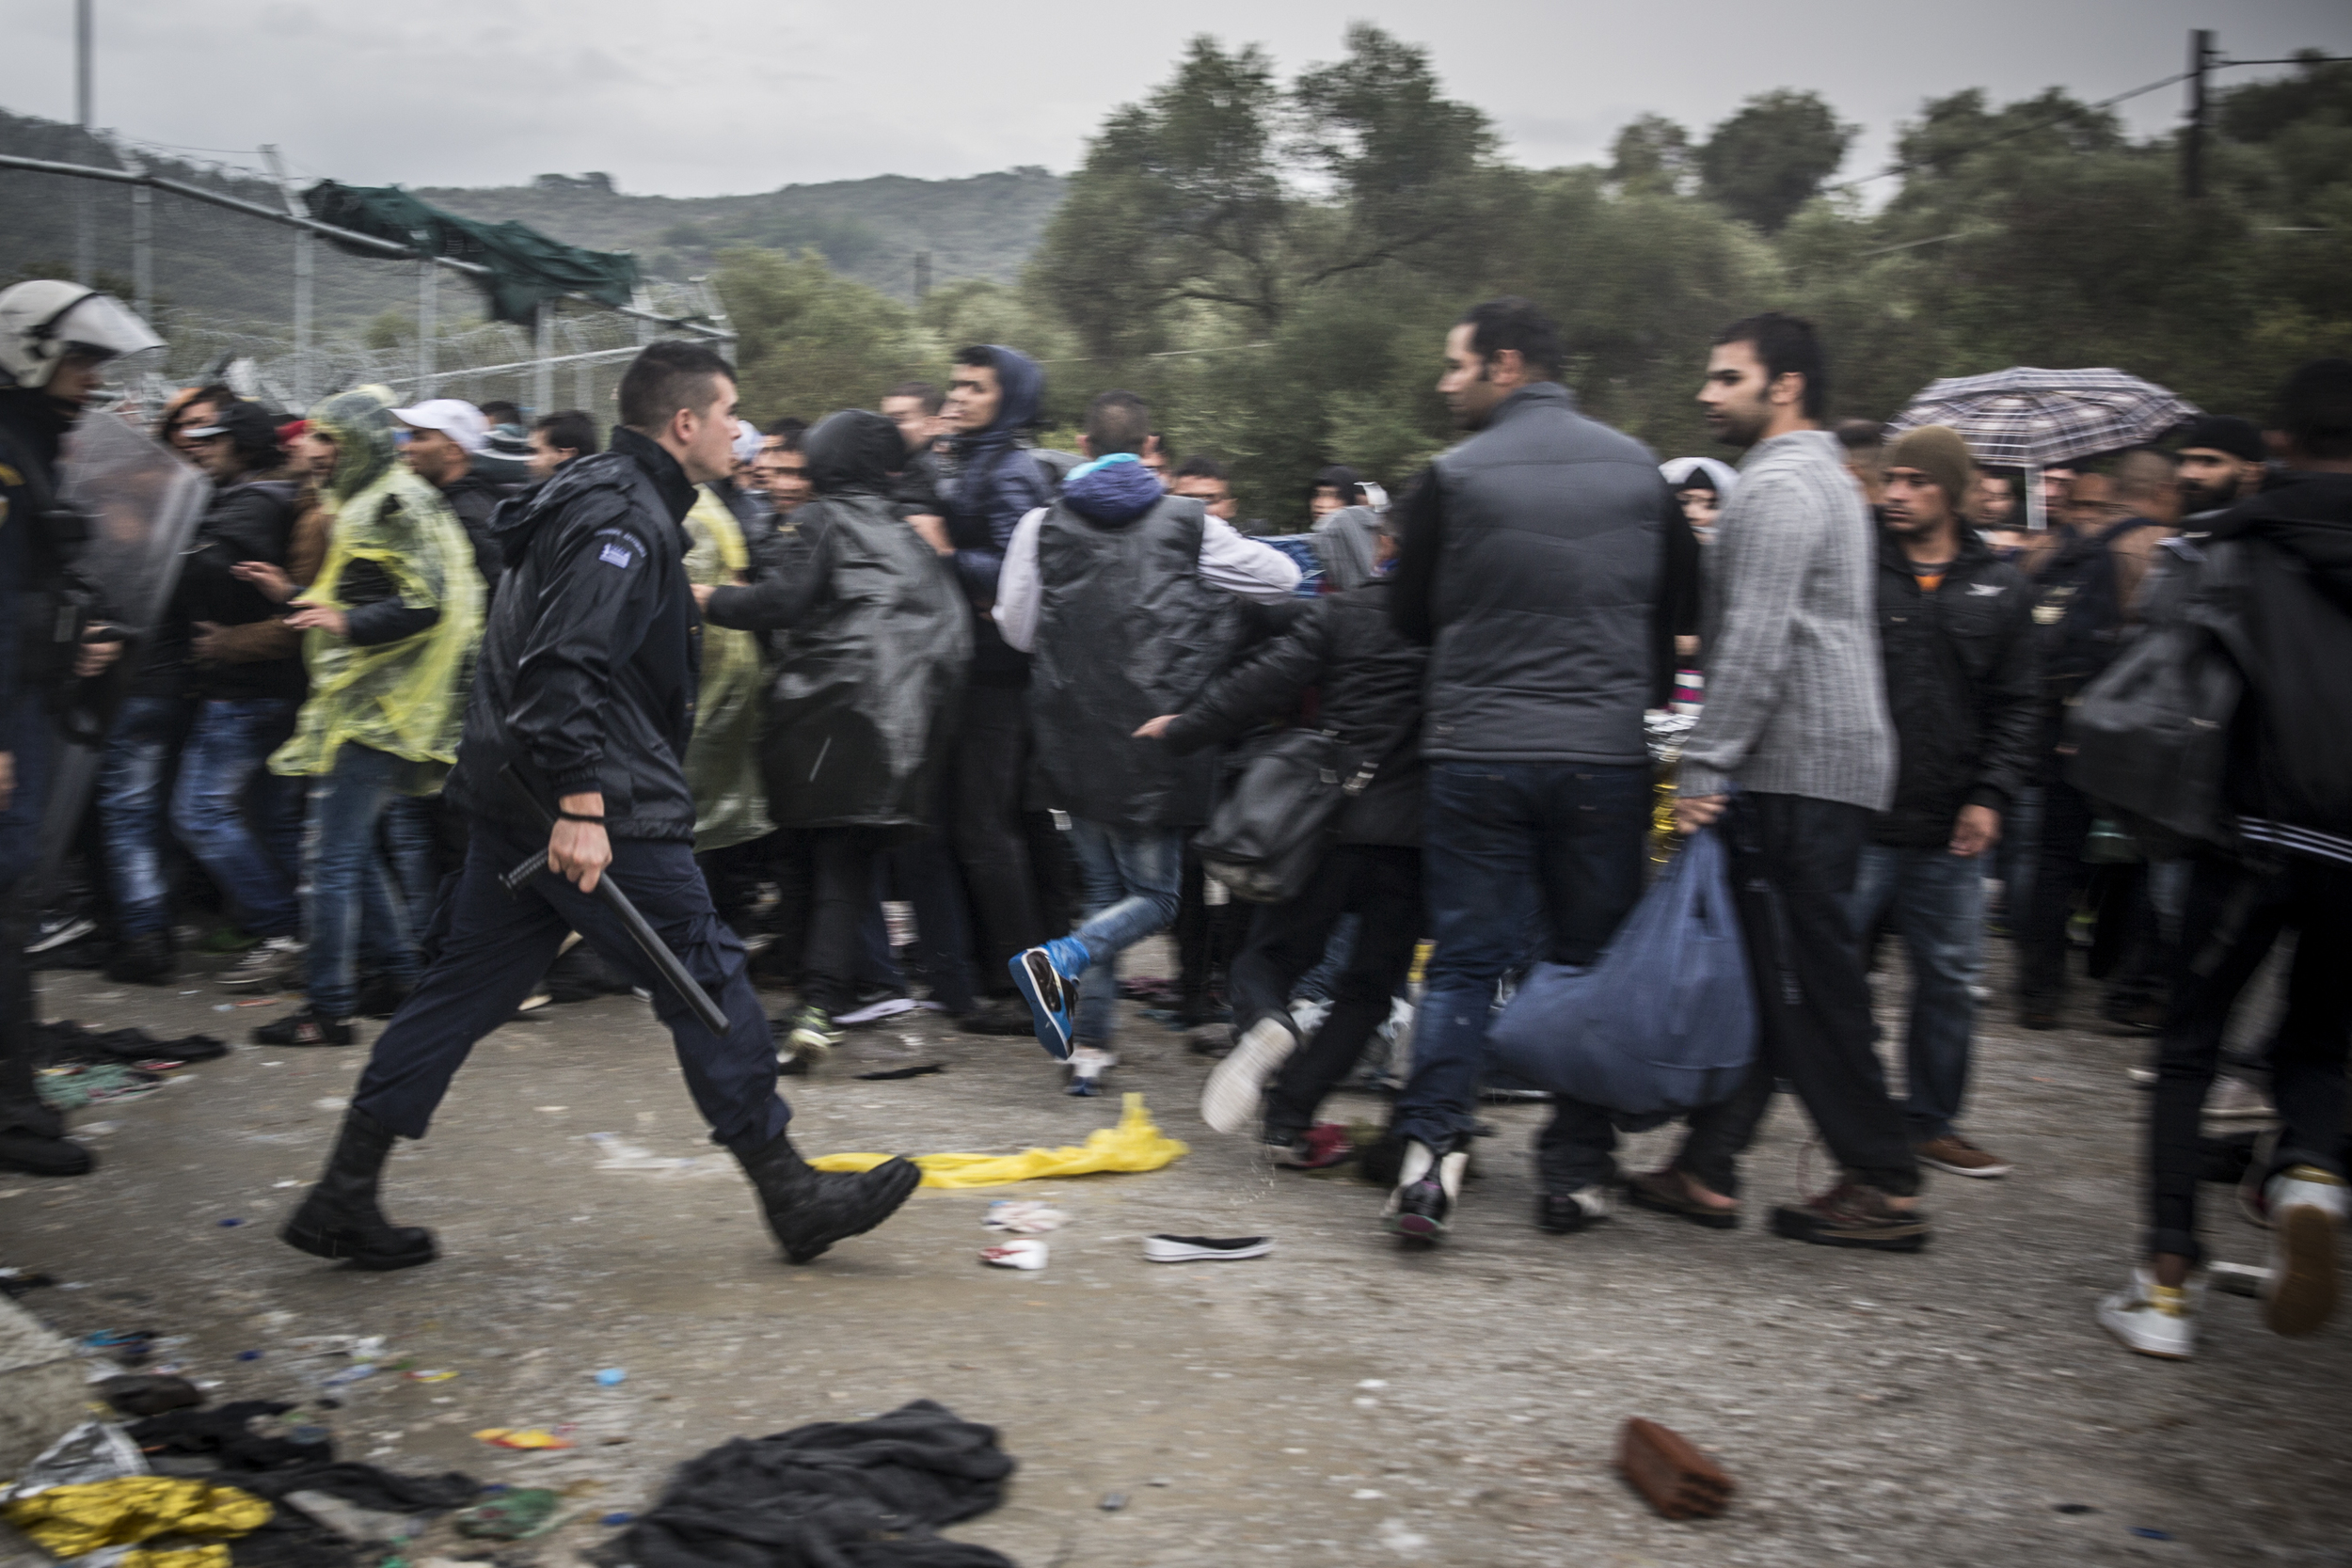   Riot police use aggressive tactics to control a crowd of refugees waiting to get into Moria  